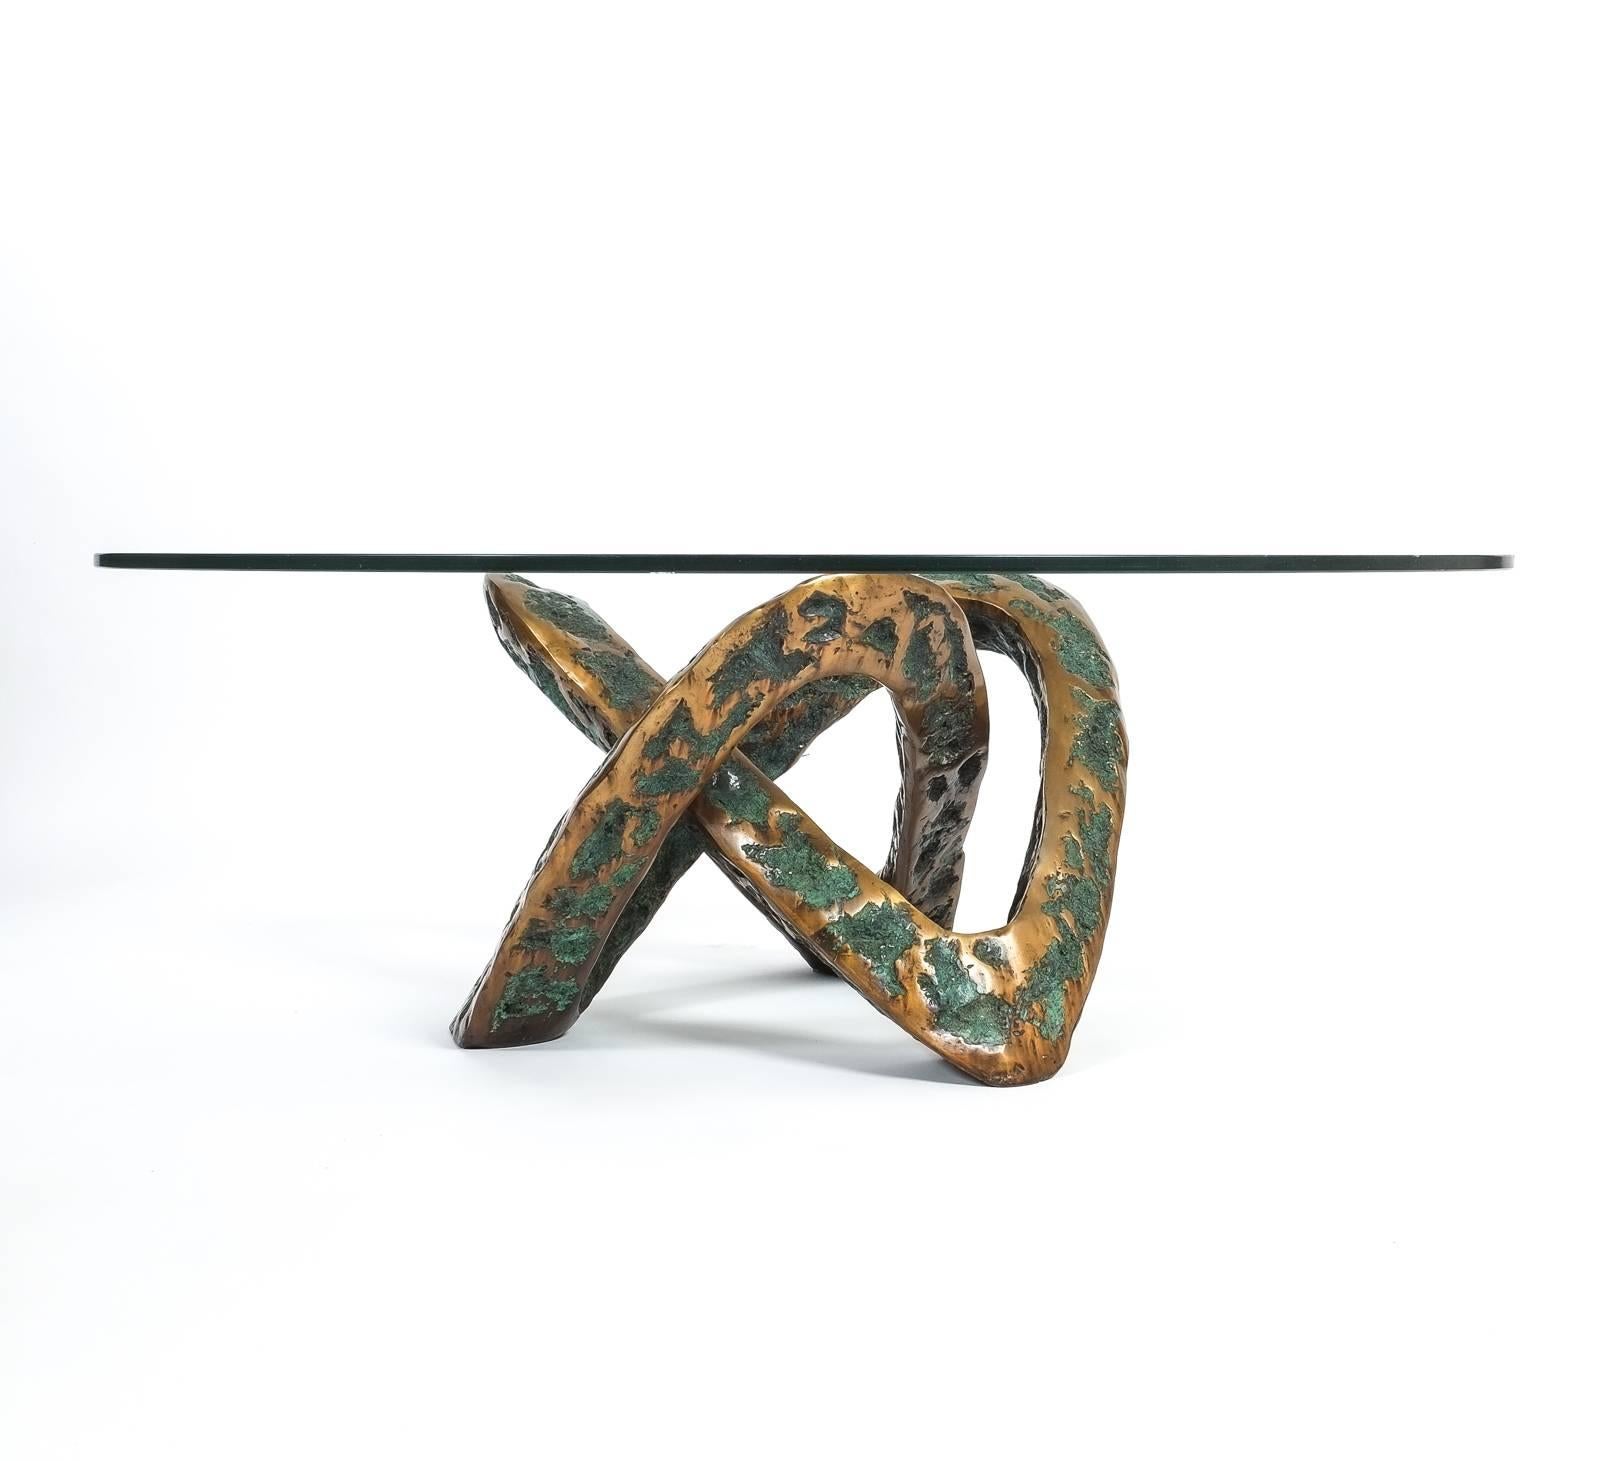 Sculptural Brutalist Mobius Bronze Table, circa 1960

Very rare bronze cast coffee table, circa 1965. Heavy handmade Mobius knot made from bronze, partially patinated partially polished. It's in excellent condition, very much in the style of Paul